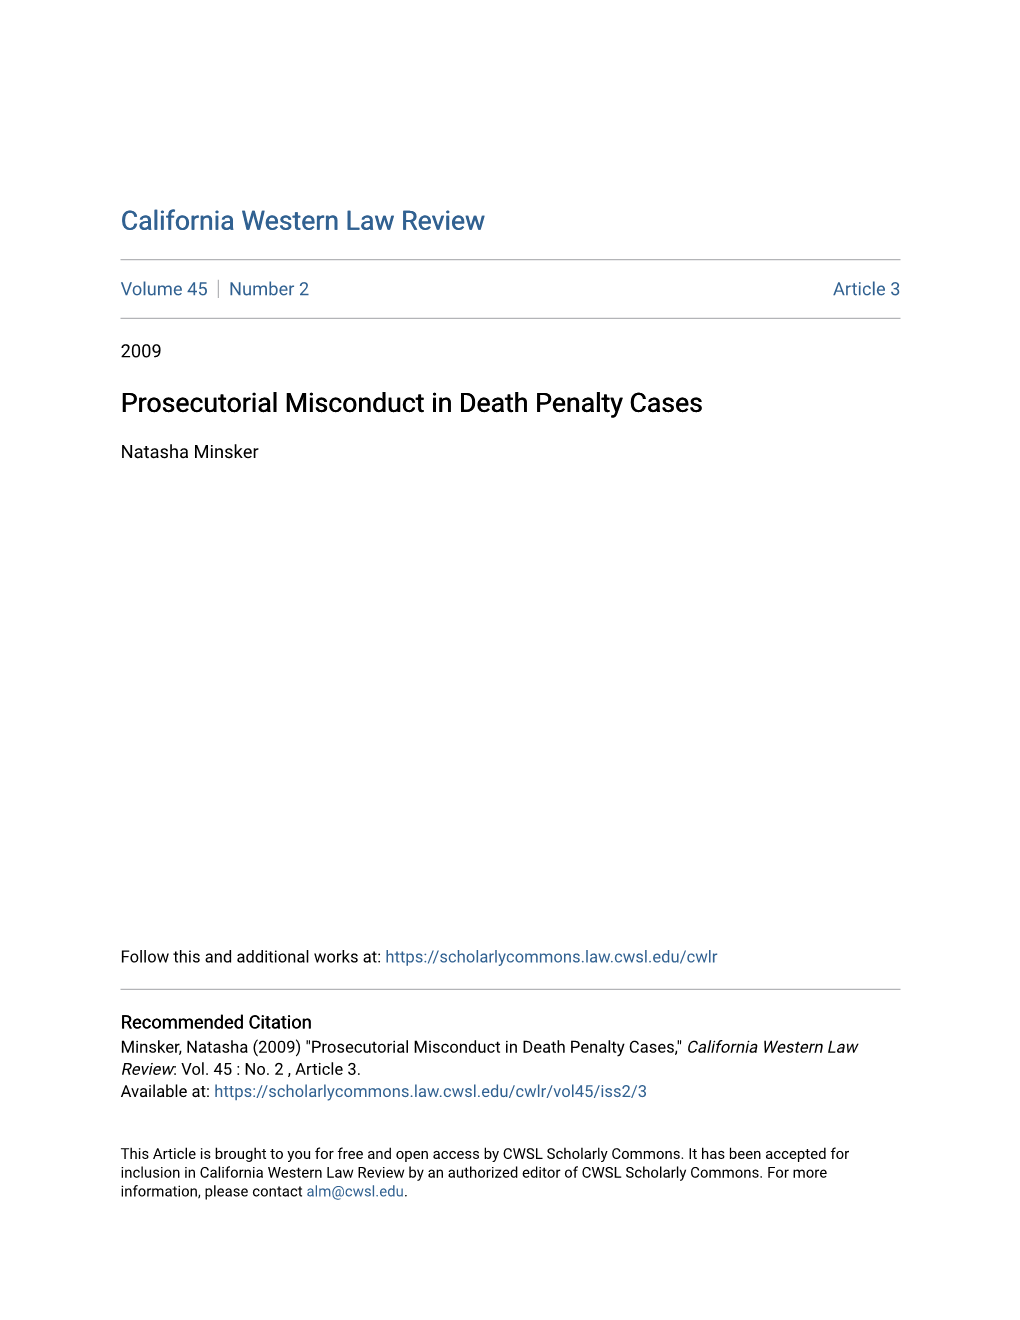 Prosecutorial Misconduct in Death Penalty Cases